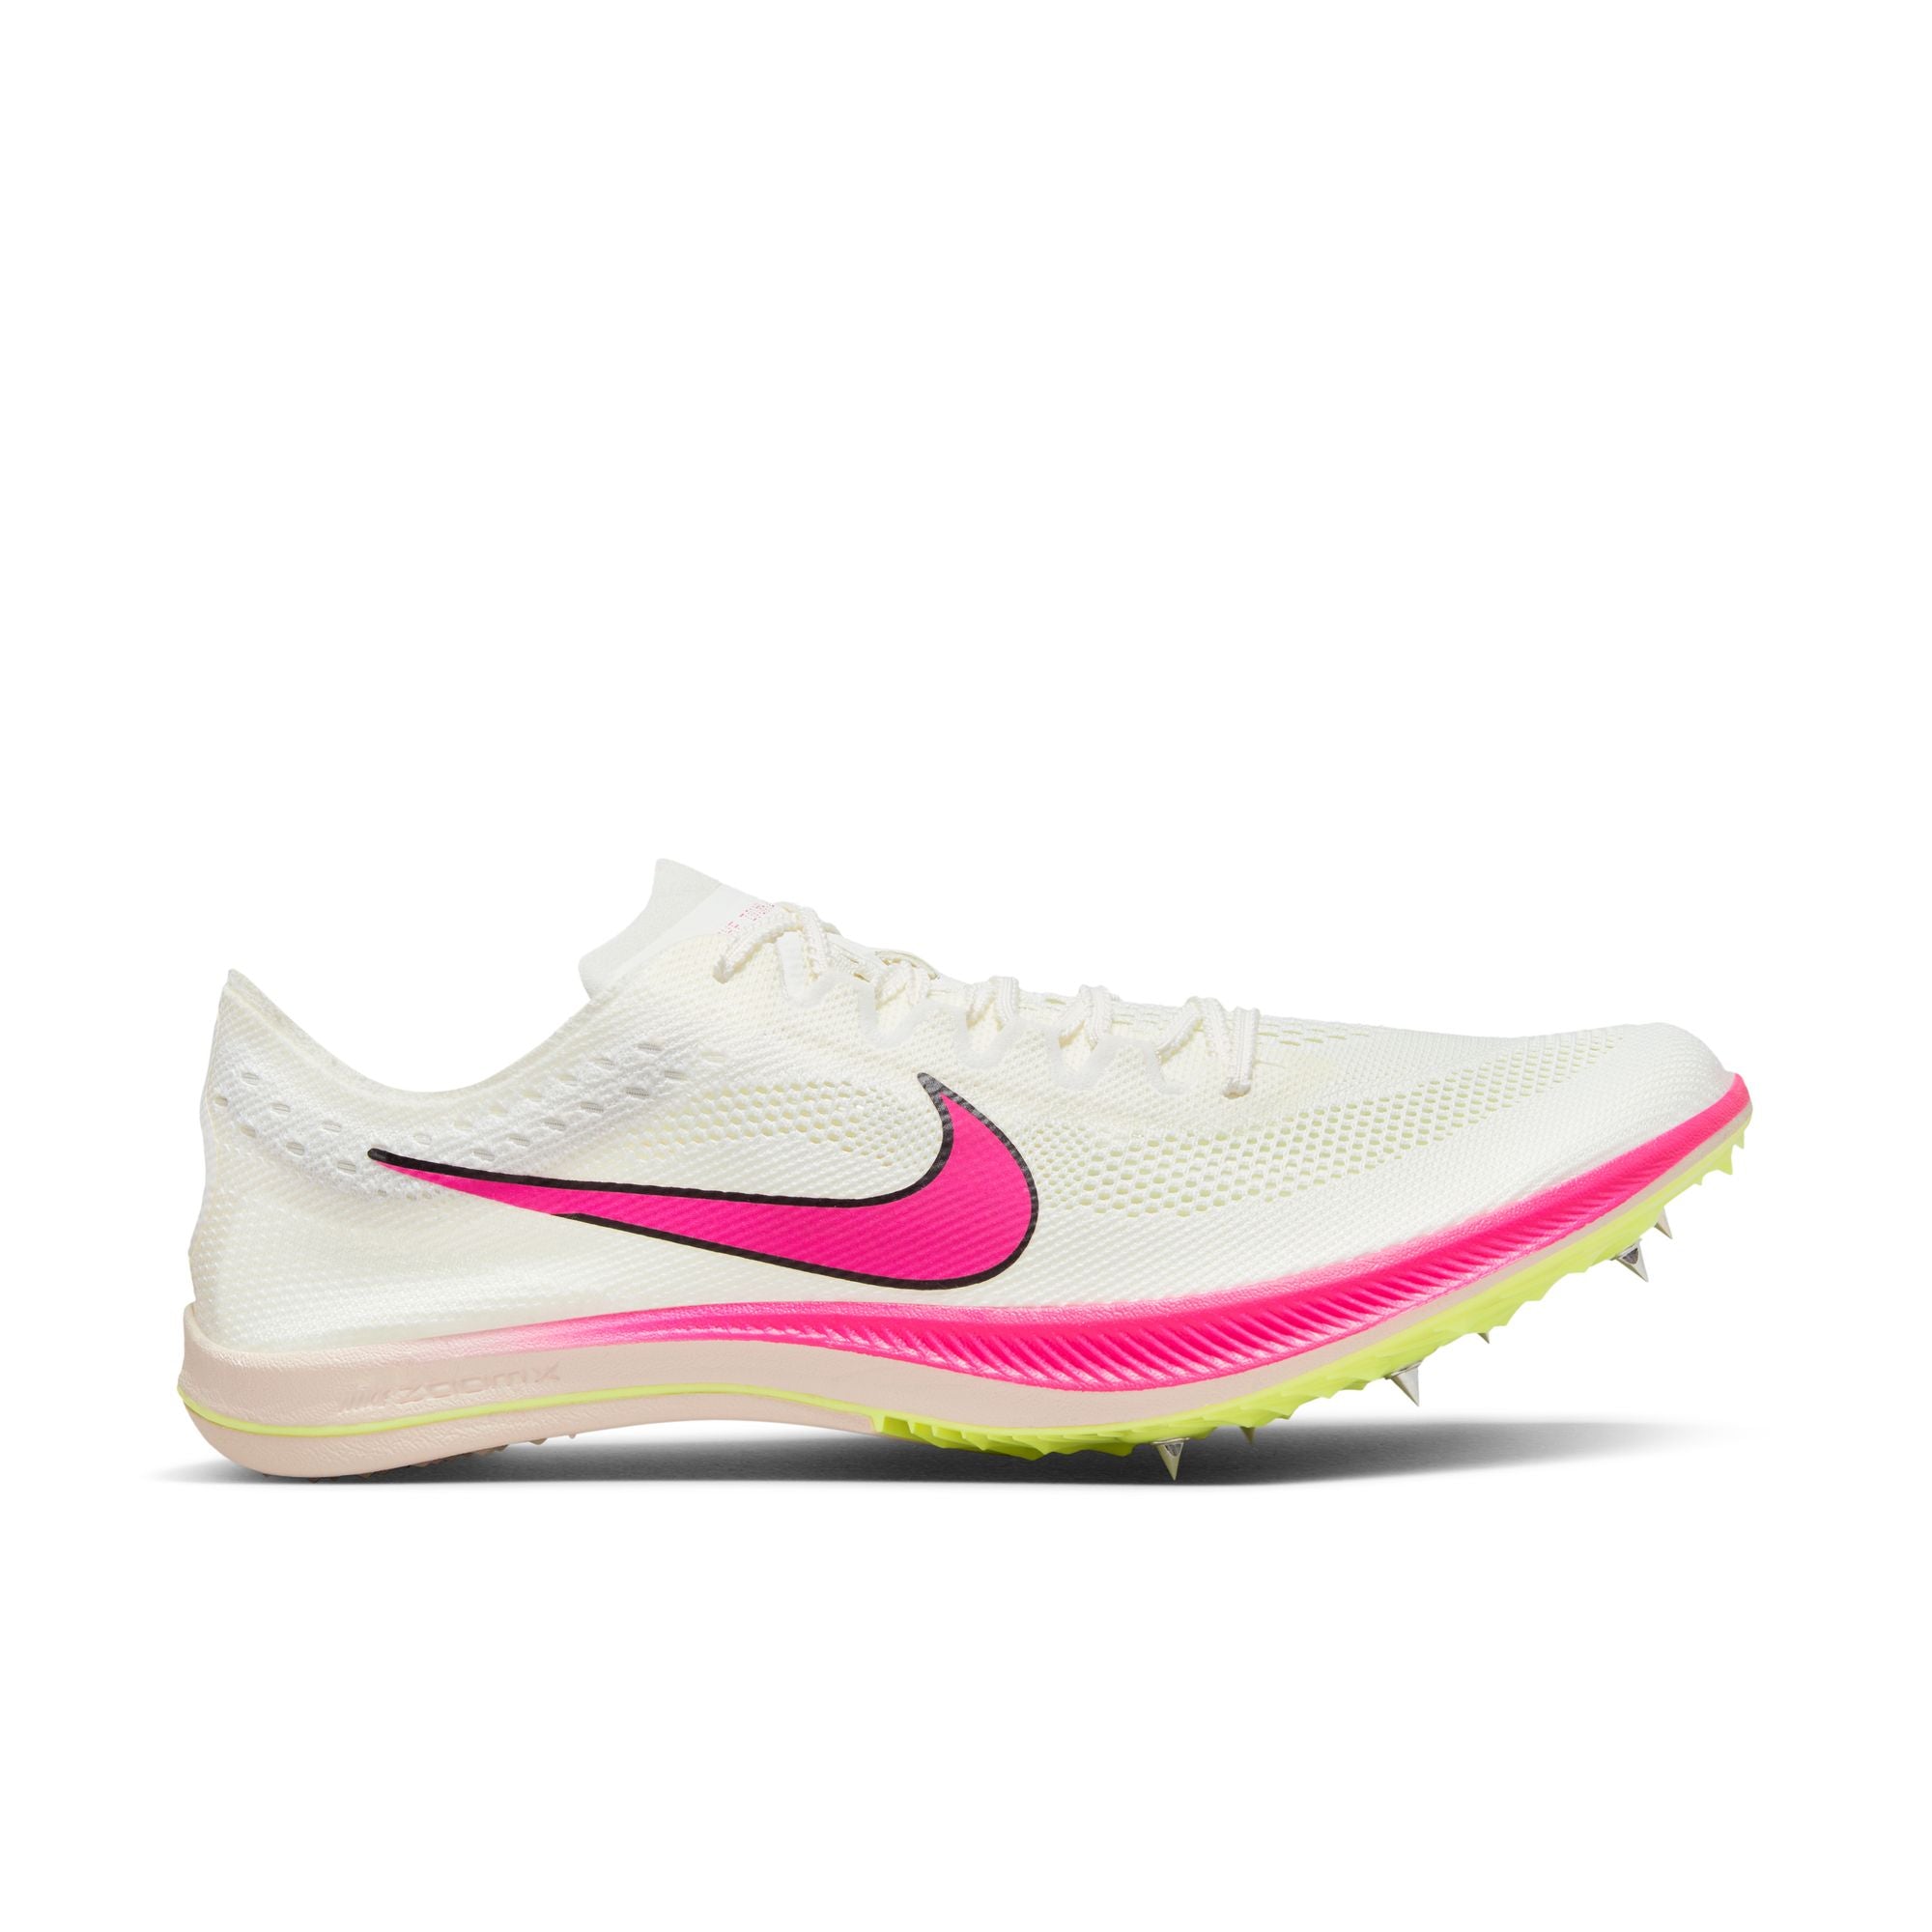 NIKE ZOOMX DRAGONFLY - 101 SAIL/FIERCE PINK 4.0